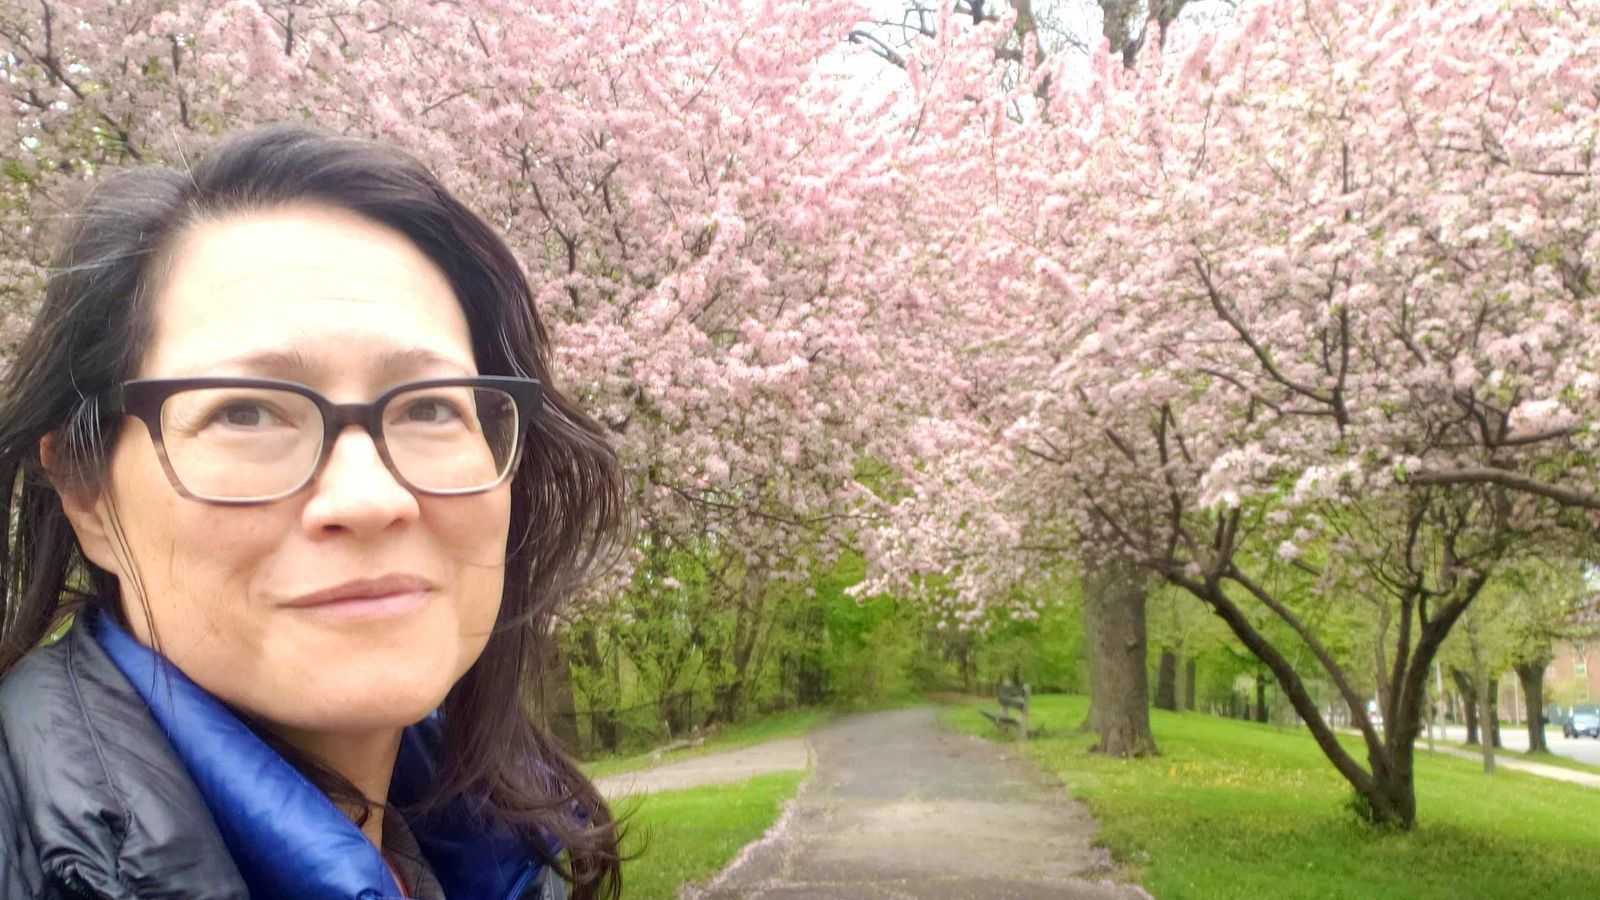 Axios Chicago reporter Monica Eng poses outside of Columbus Park, near cherry blossoms.